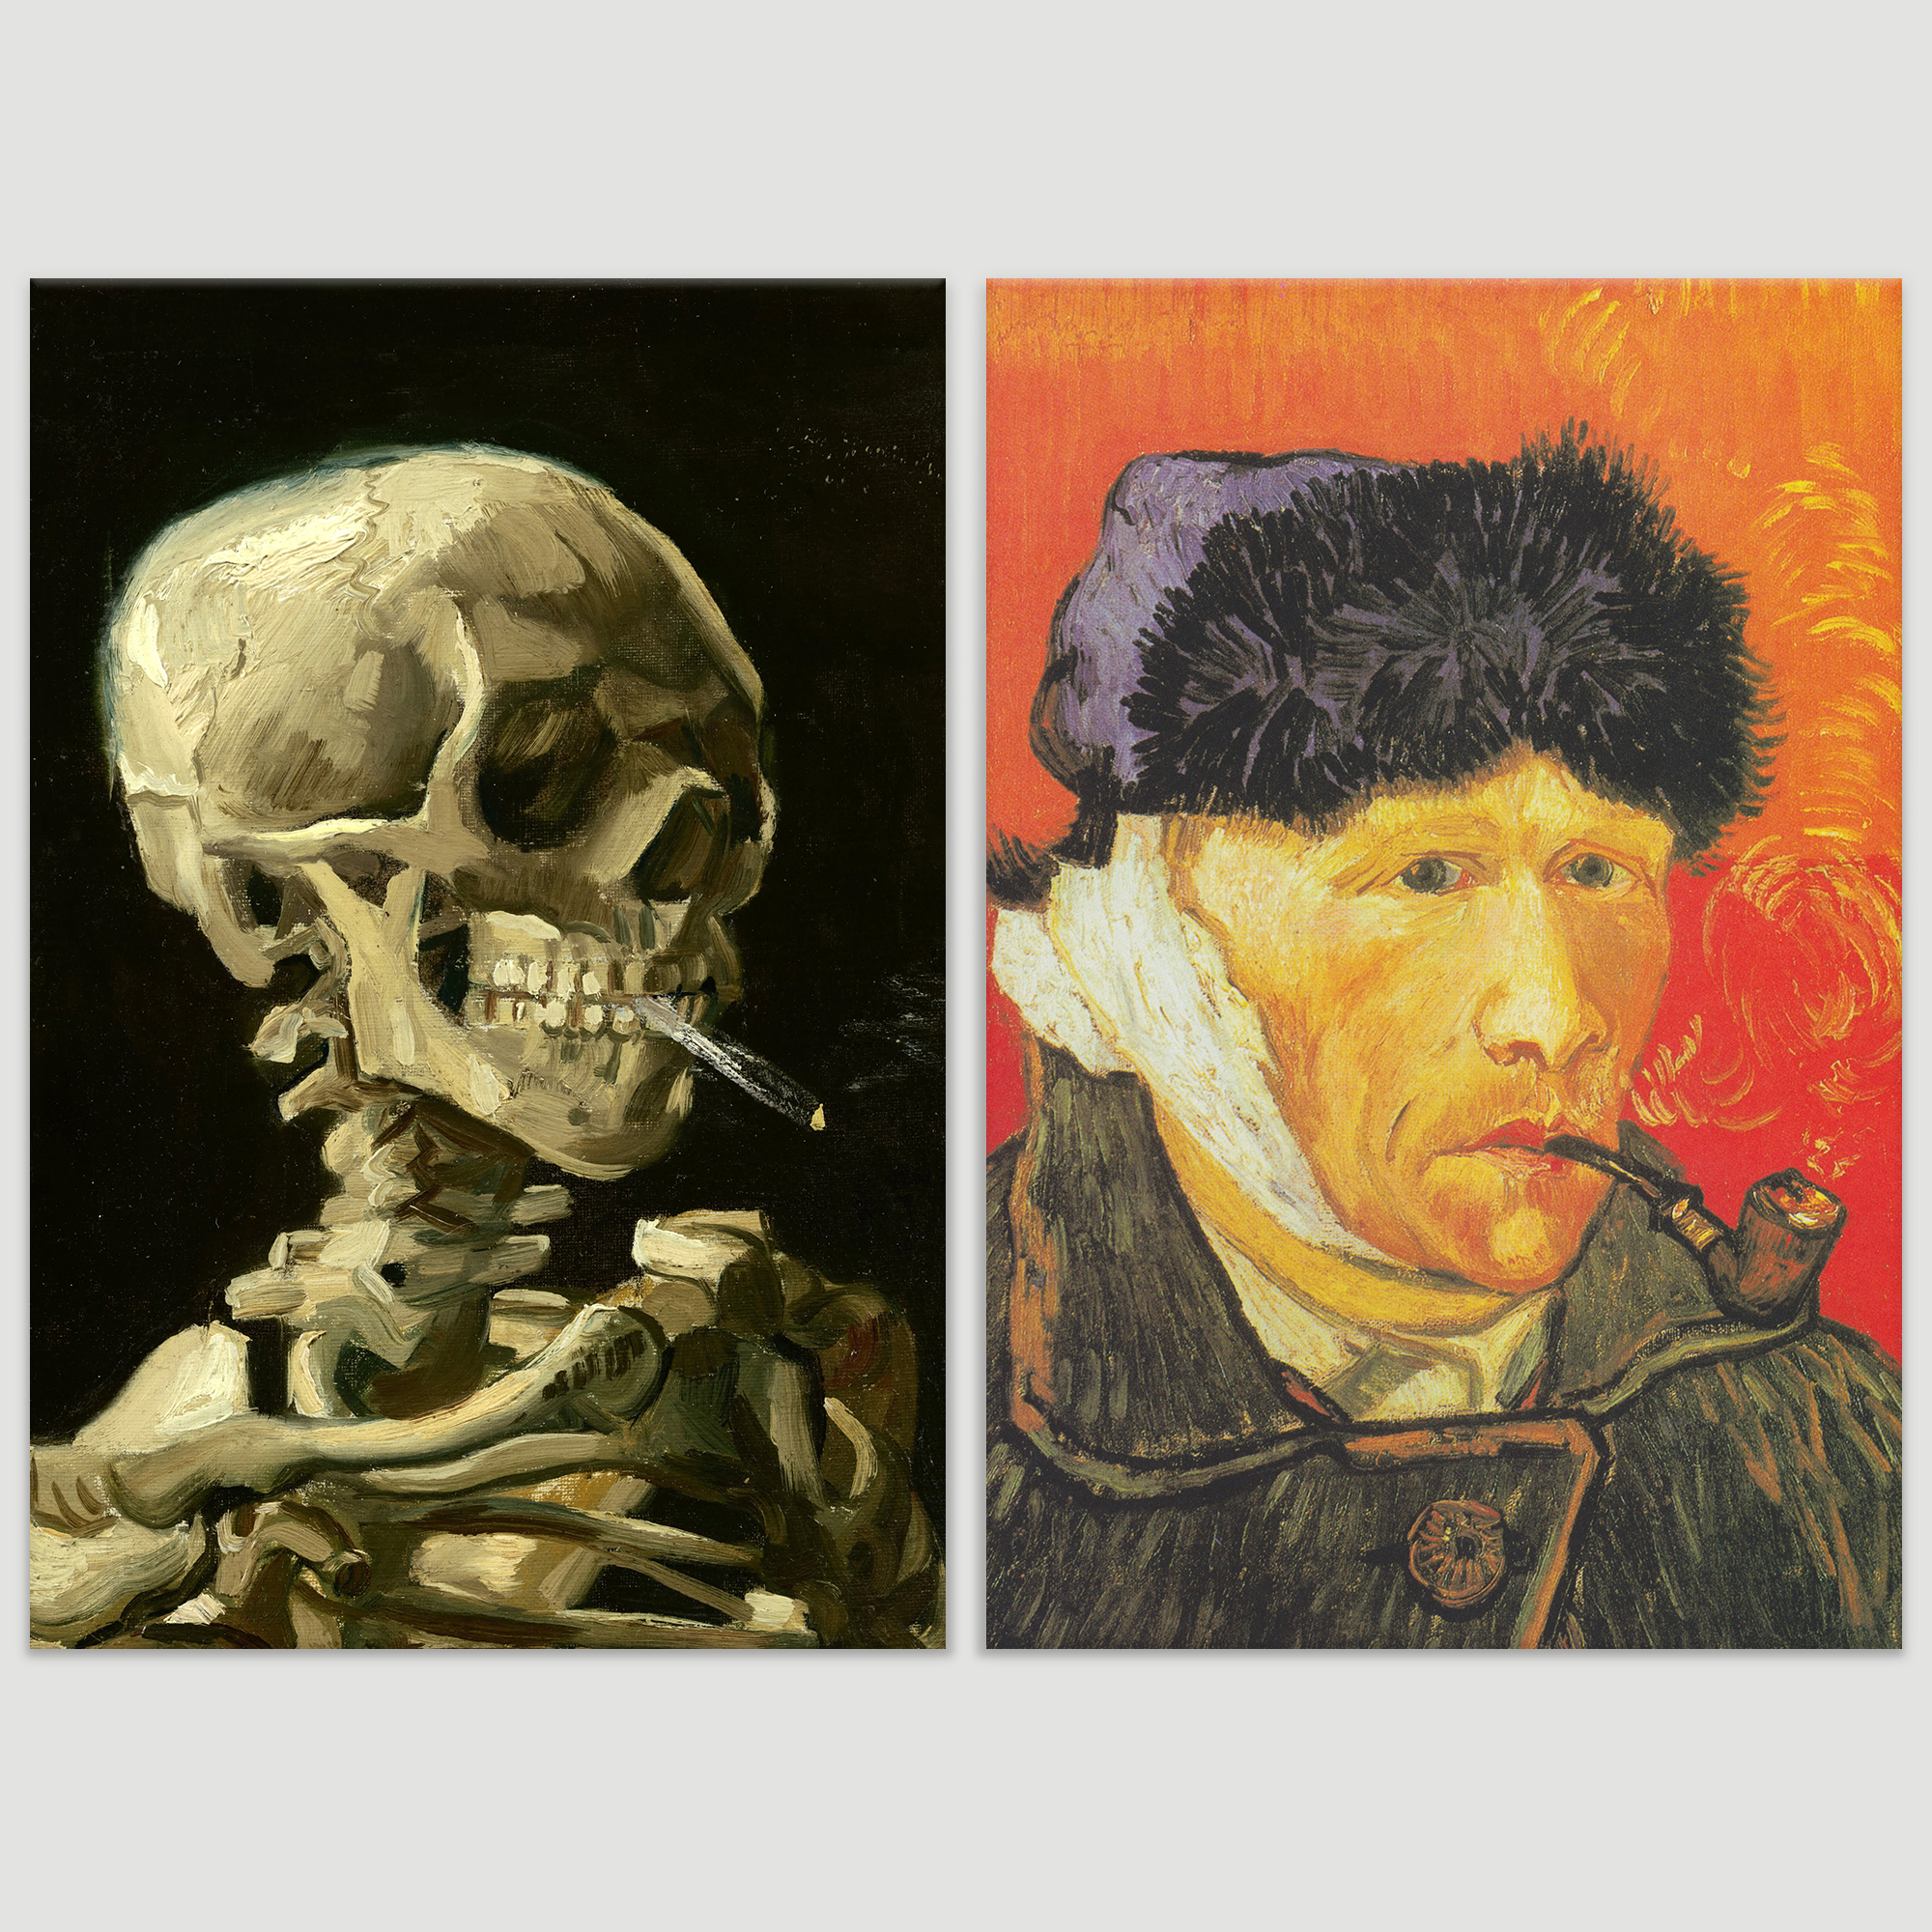 Self-Portrait with Bandaged Ear/Skull of a Skeleton with Burning Cigarette by Vincent Van Gogh - Oil Painting Reproduction in Set of 2-16